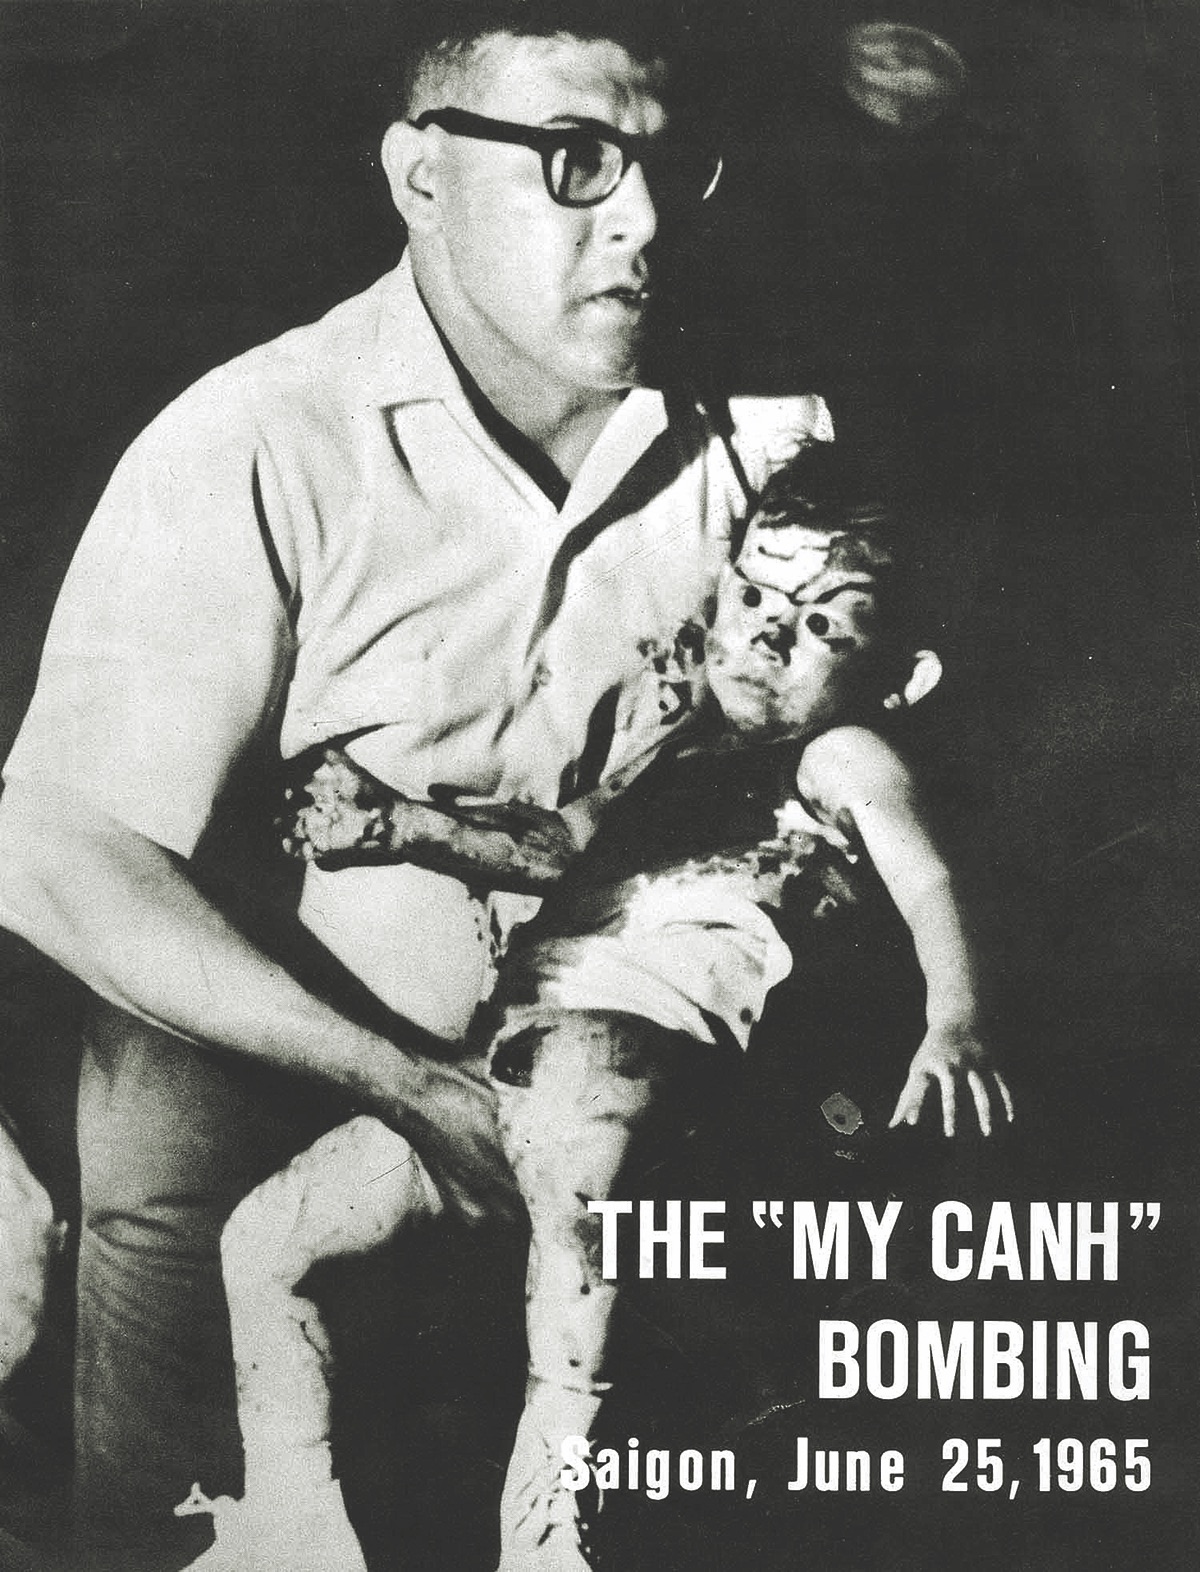 To draw attention to the brutality of the bombing, the U.S. government’s public affairs office in Saigon published a pamphlet of pictures showing the savageness of the attack on the restaurant. The My Cahn child, misidentified as a boy, was on the cover. (Joint U.S. Public Affairs Office)